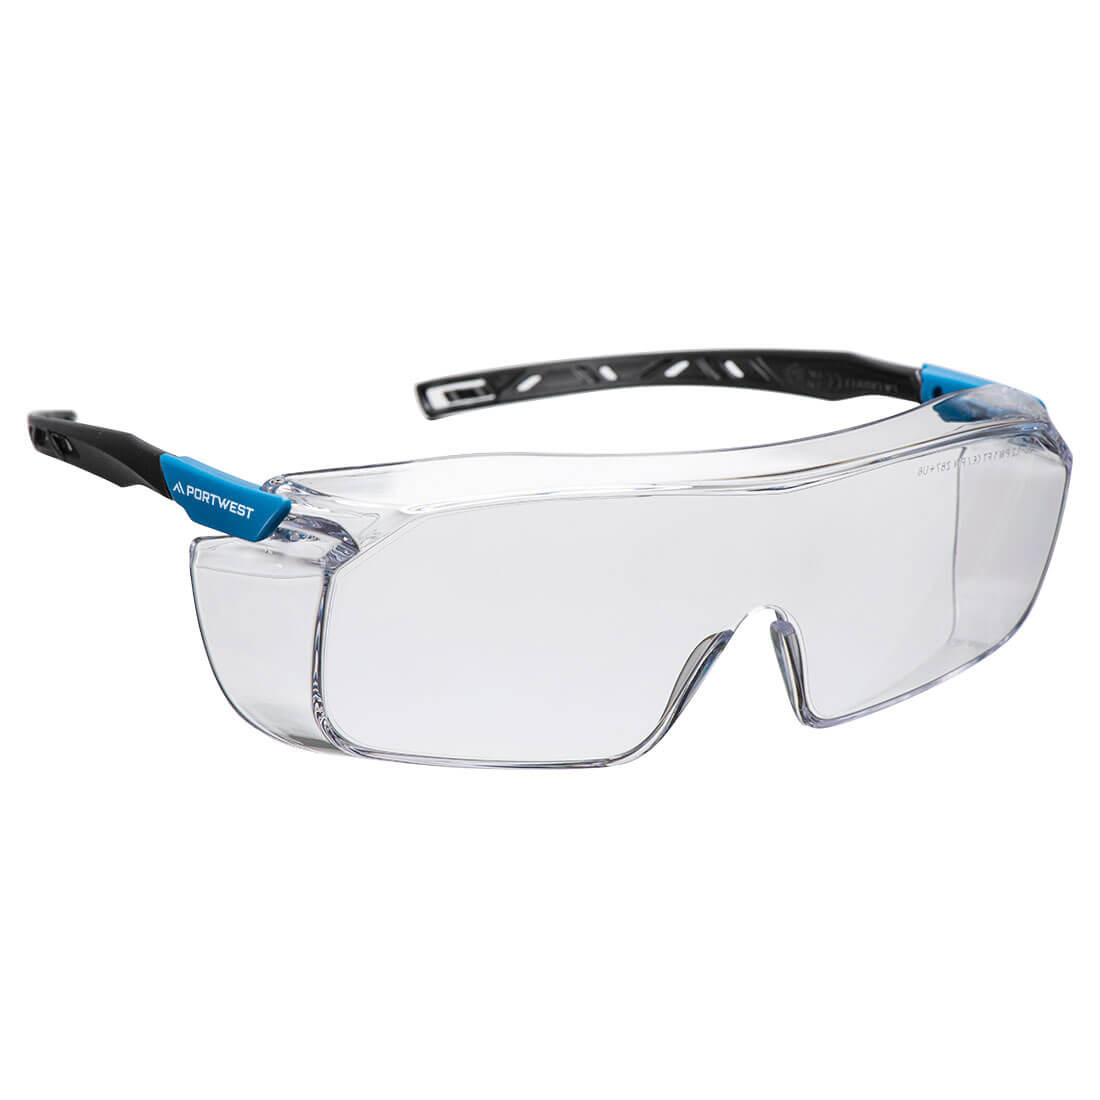 Top OTG Safety Glasses - Personal protection